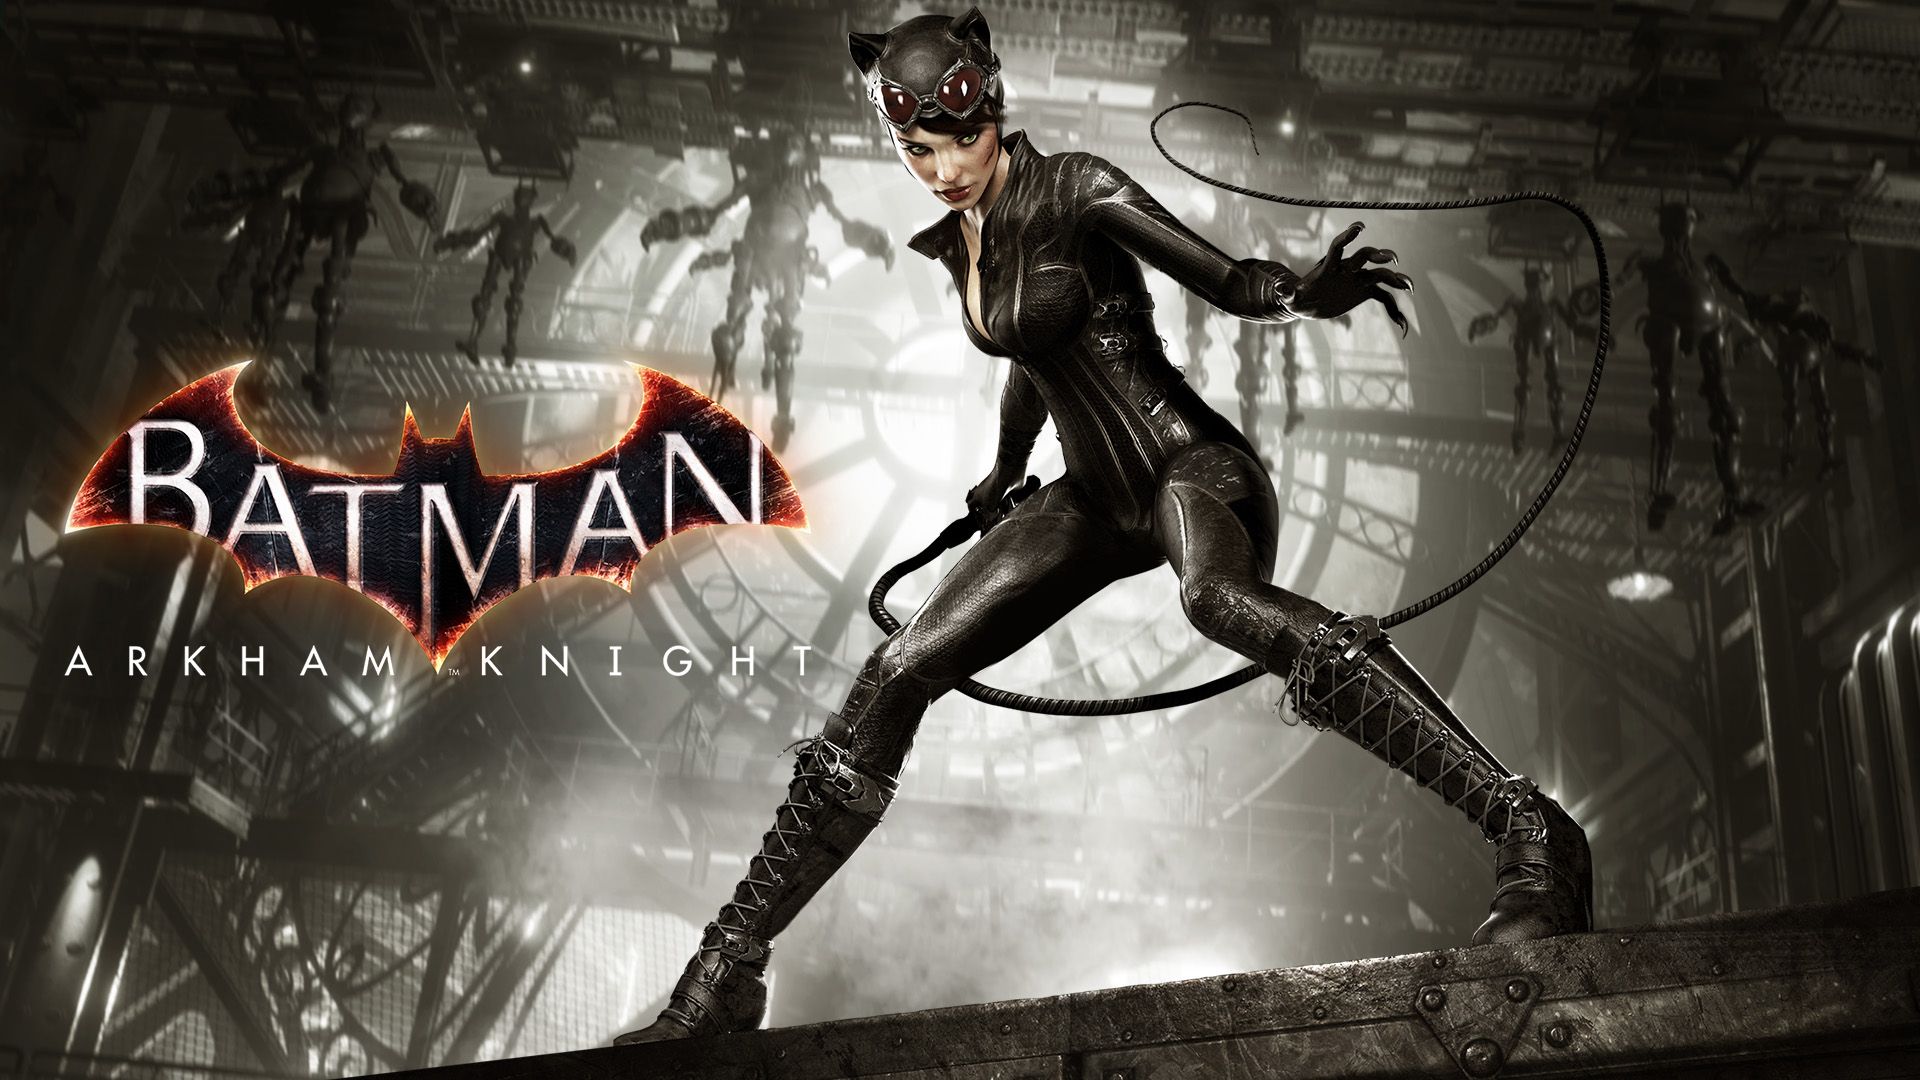 Catwoman gets own story in Batman Arkham